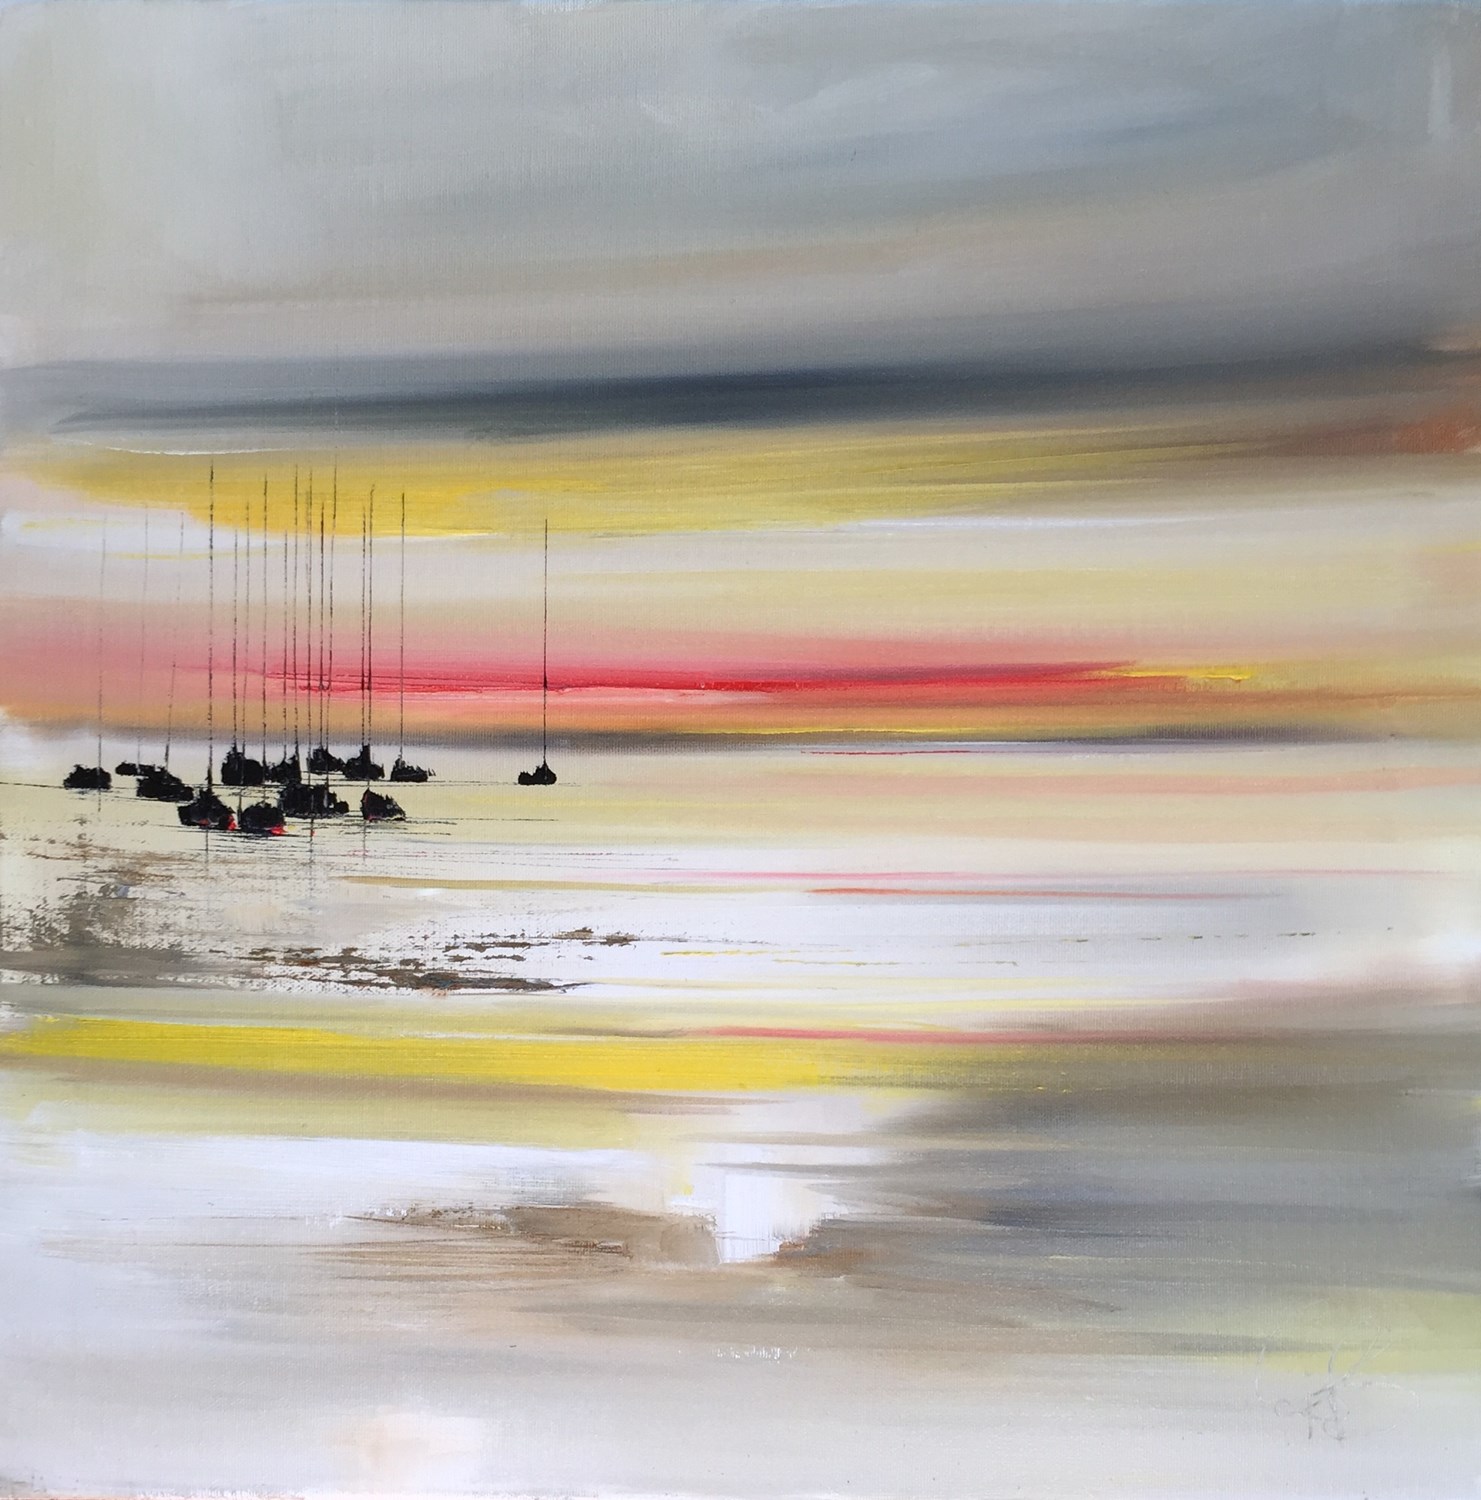 'Docked whist the Sunsets' by artist Rosanne Barr